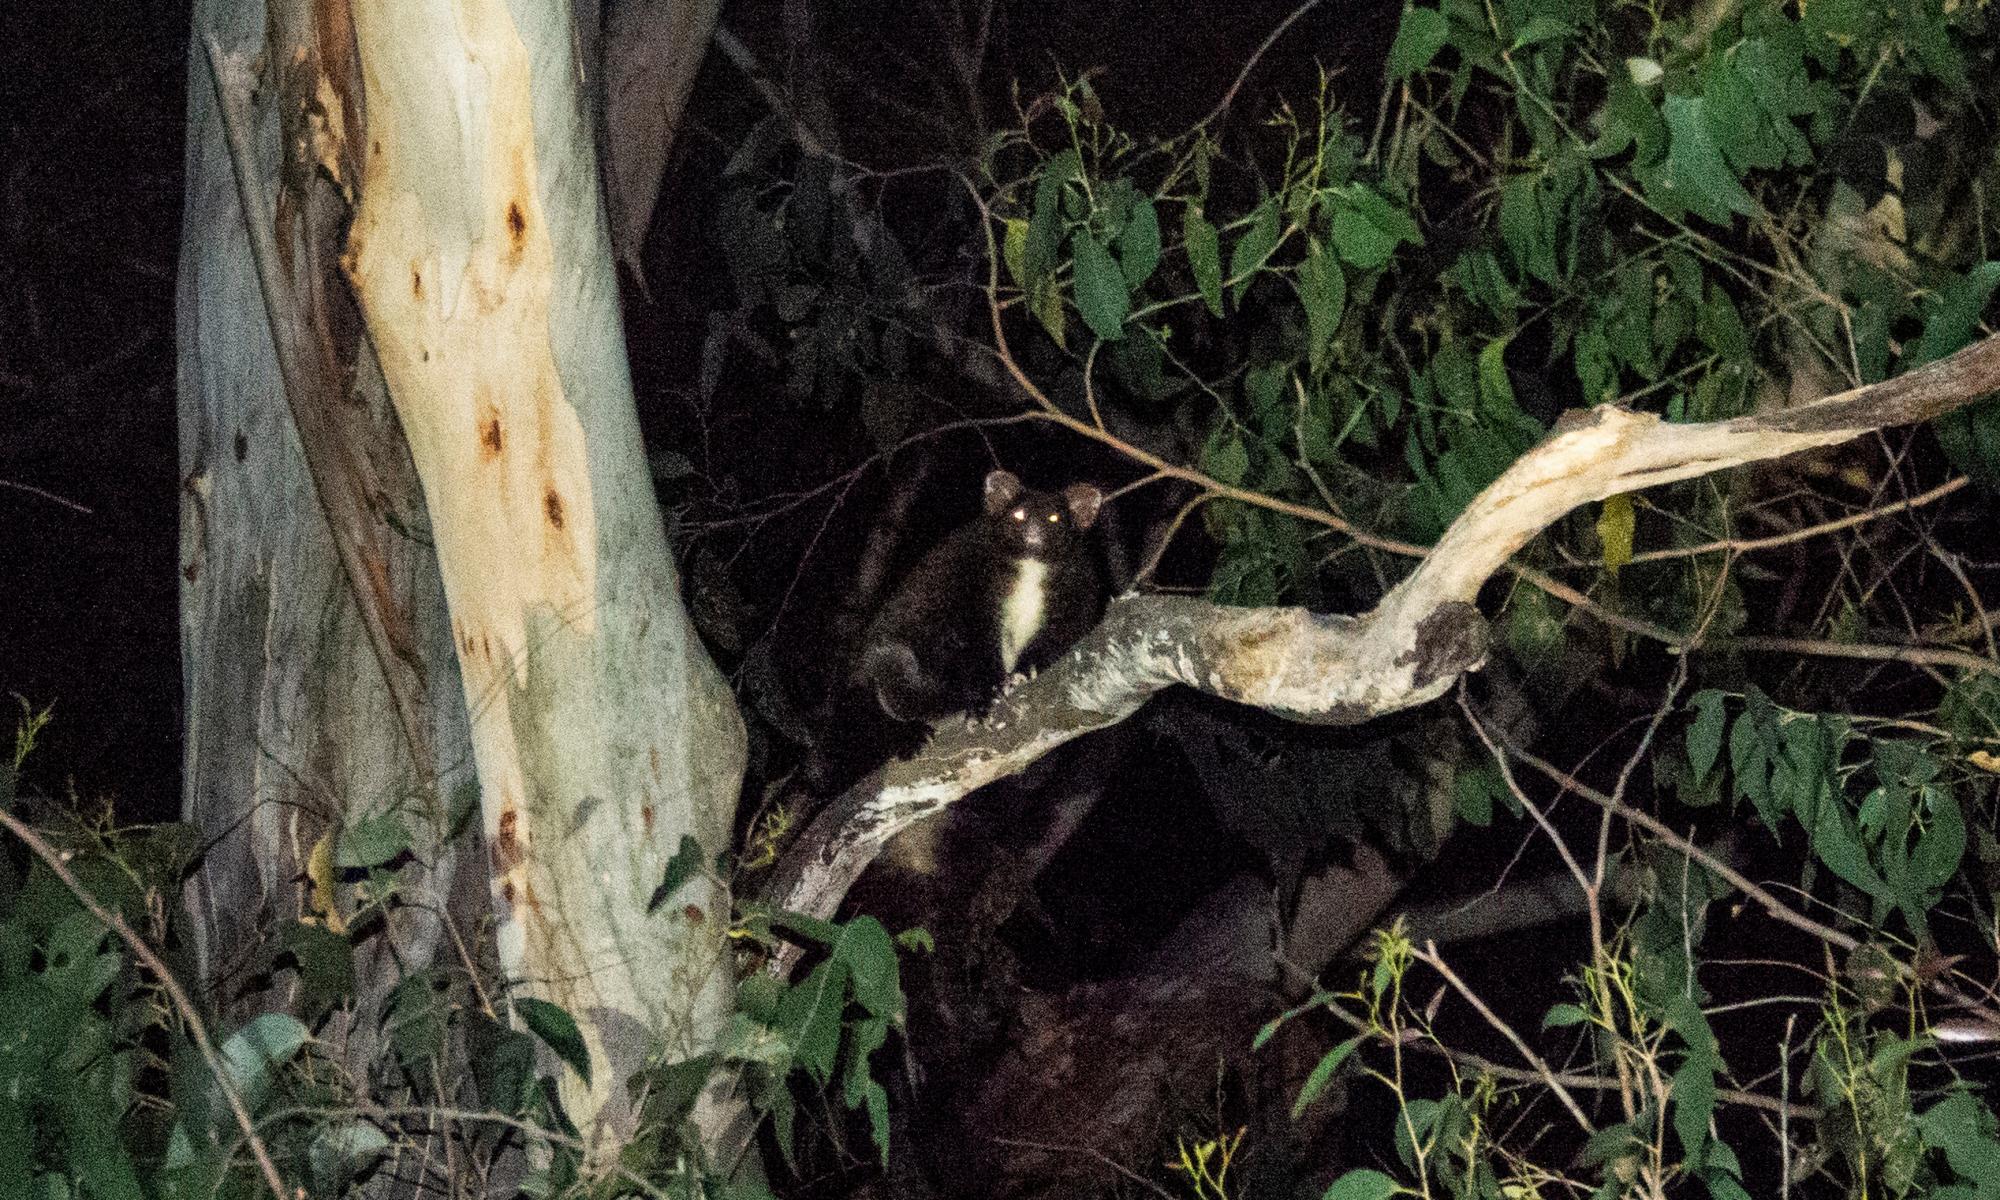 Sixty endangered greater gliders found in Victorian forests tagged for logging